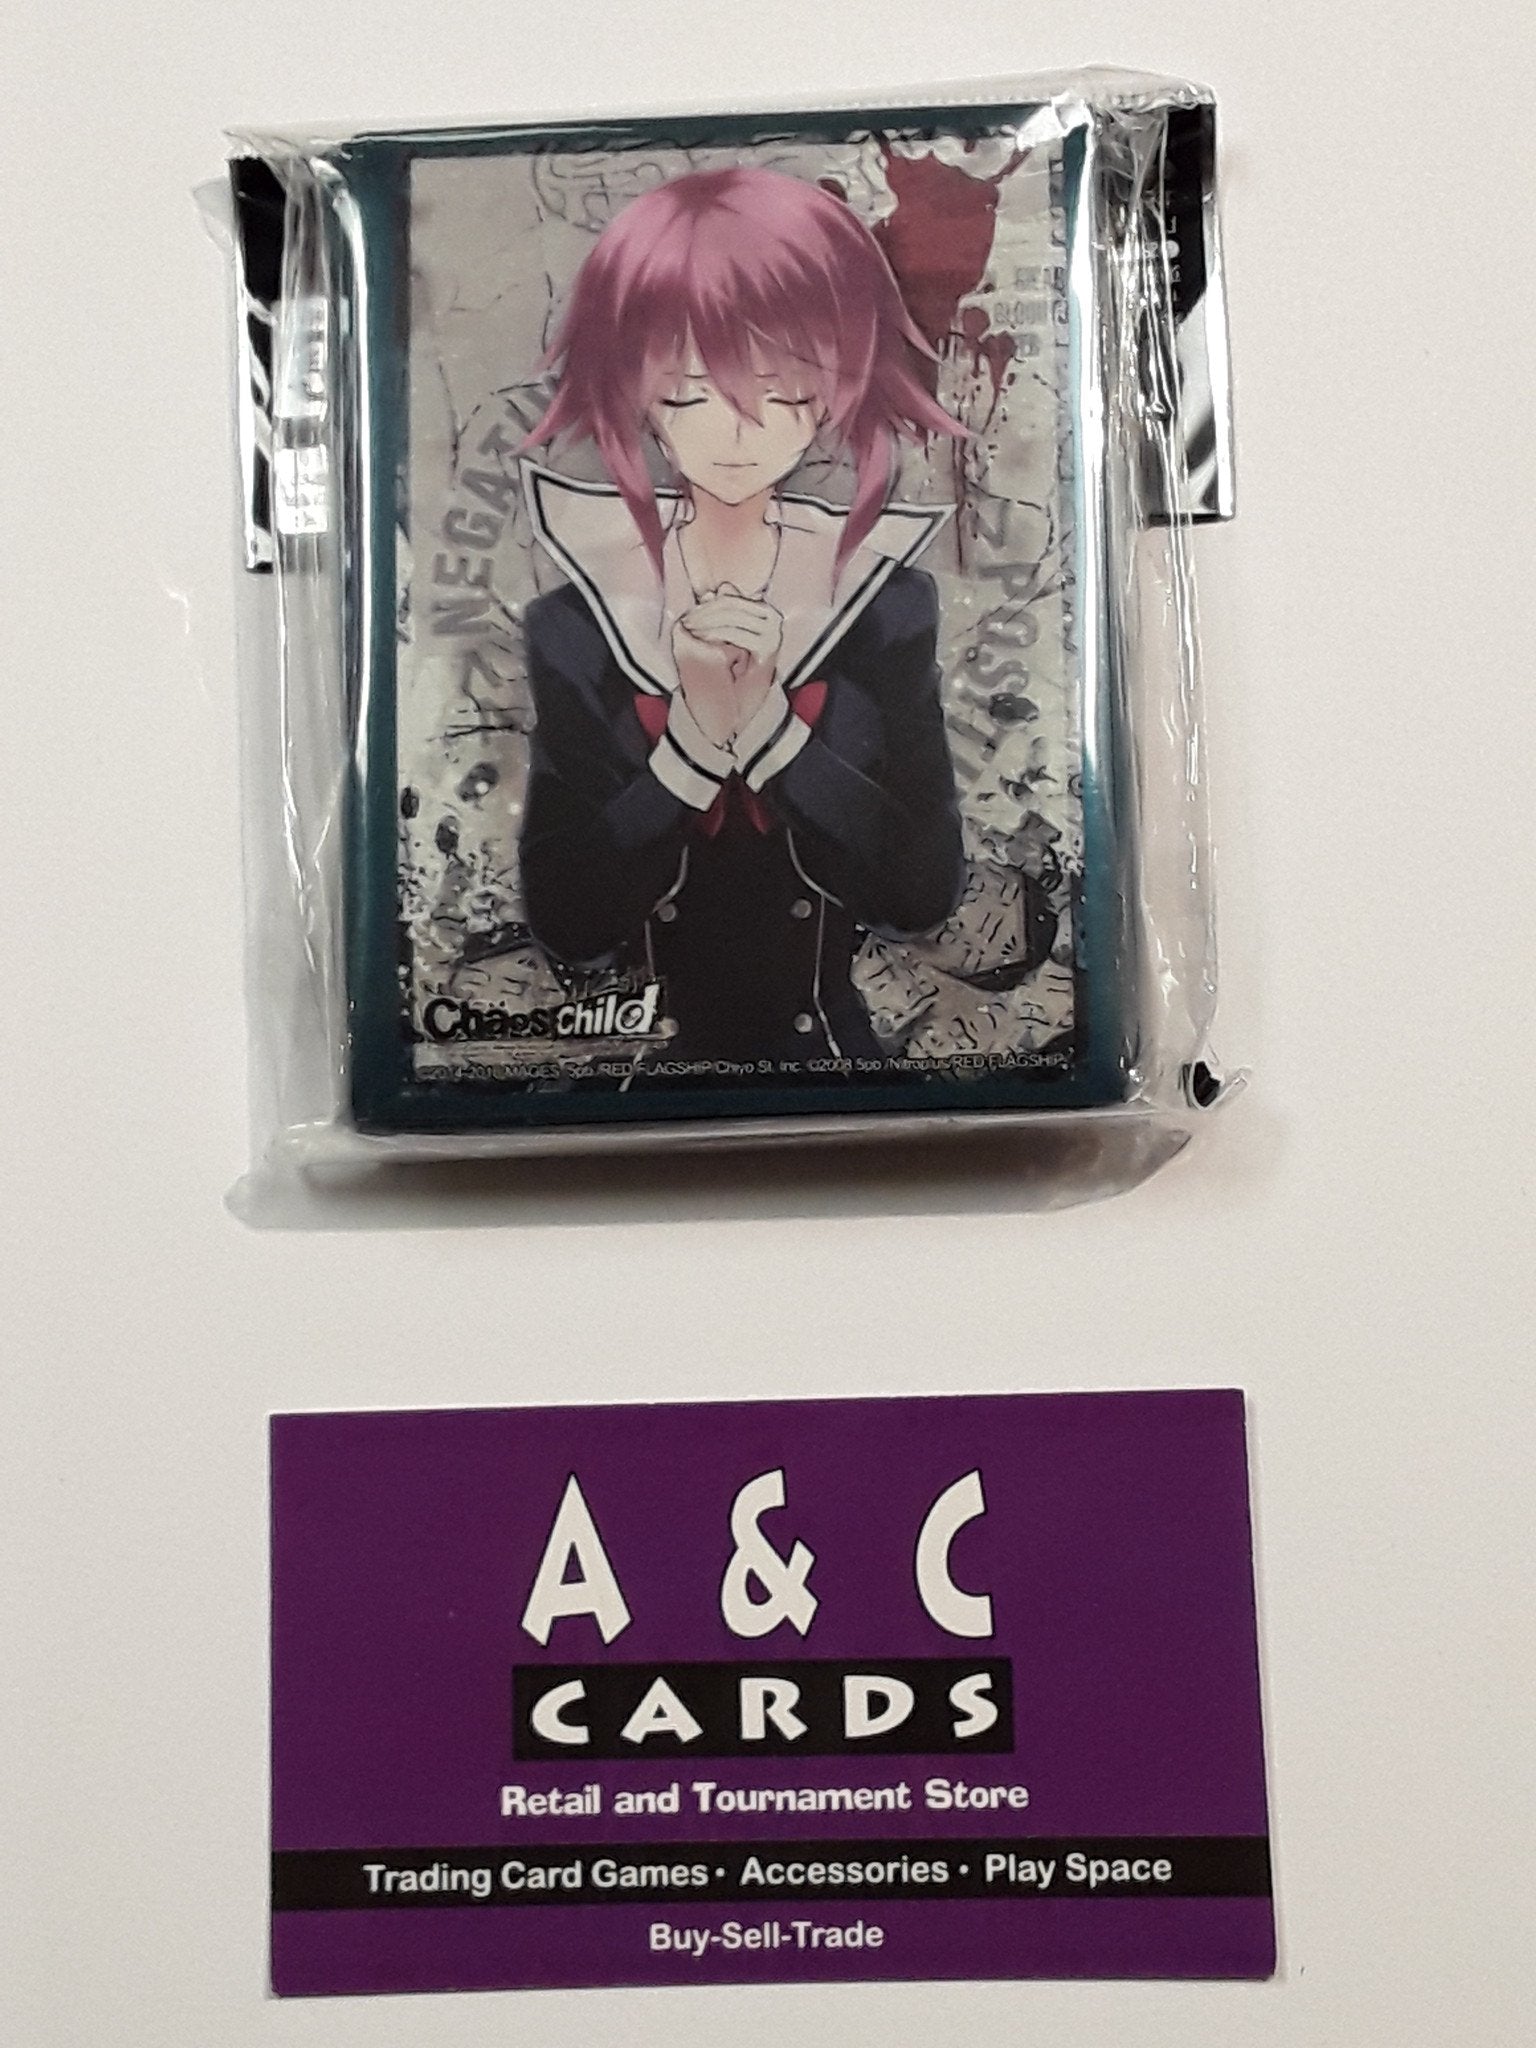 Character Sleeves "Onoe Serika" #1 - 1 pack of Standard Size Sleeves 60pc. - Chaos Child